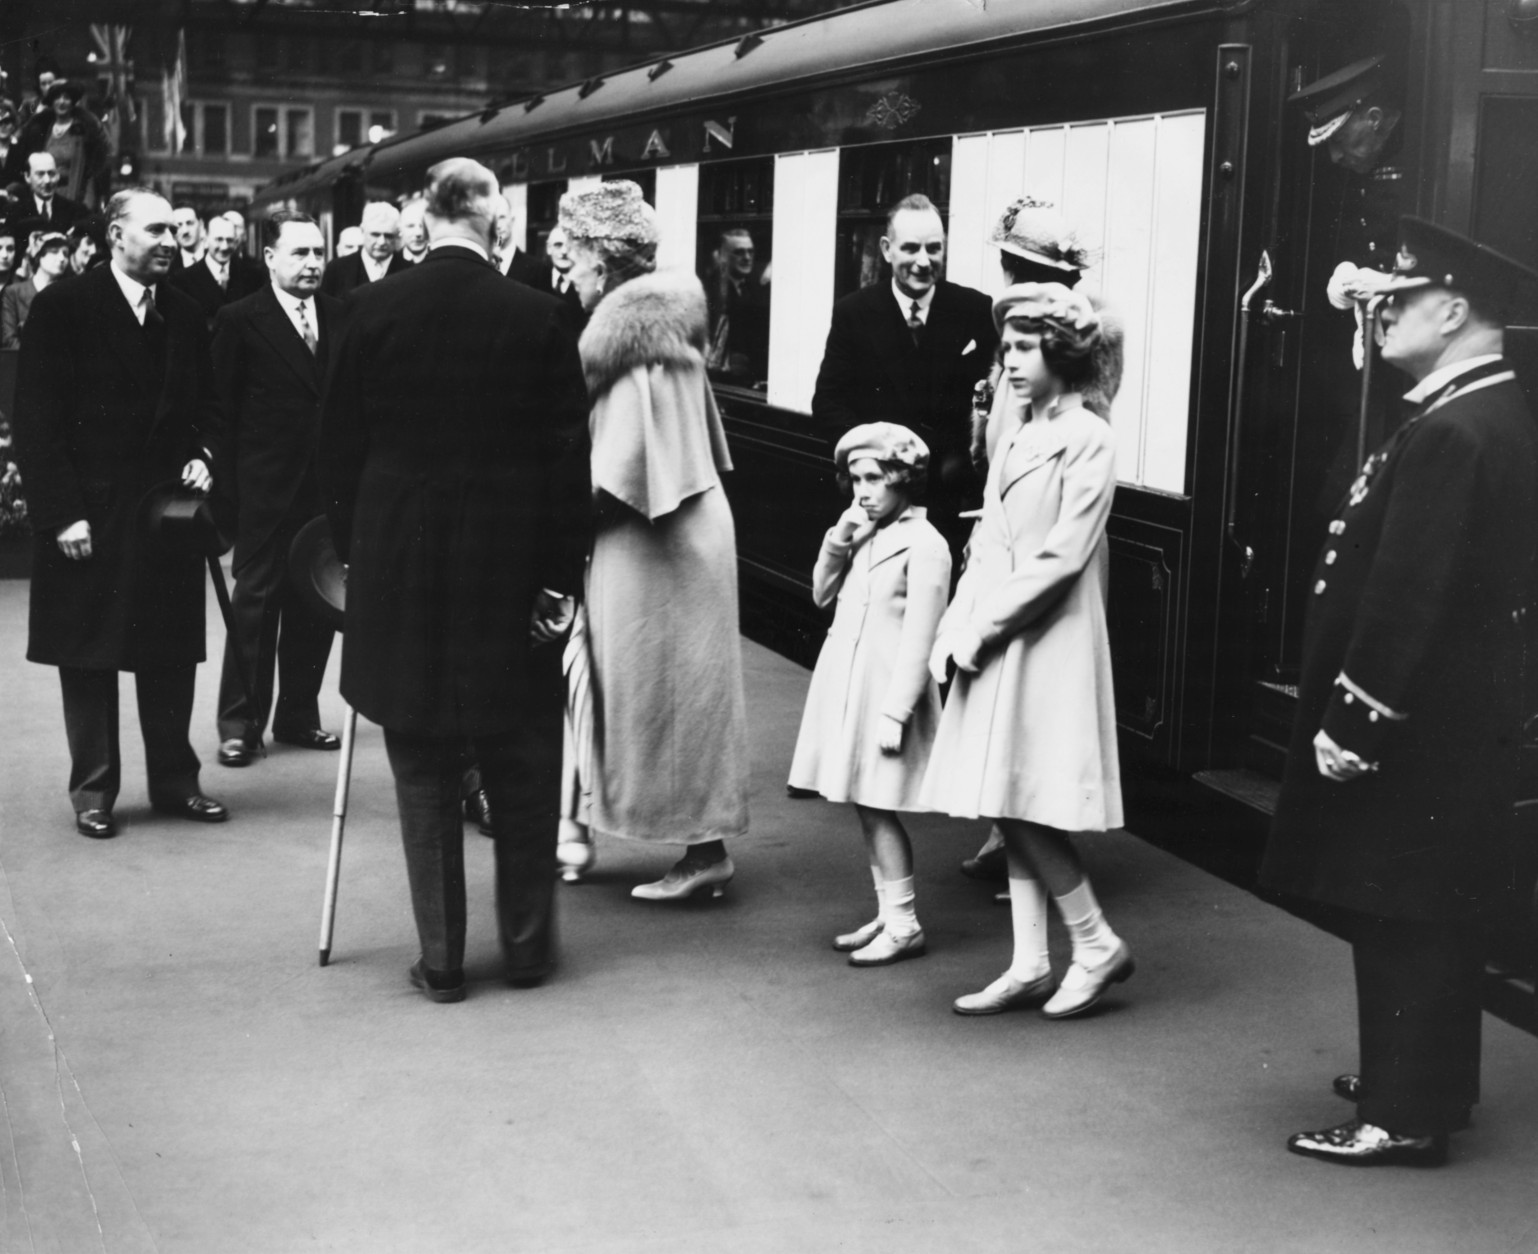 British princesses Elizabeth (right) and Margaret standing together on the train platform as they see off their parents, King George VI and Queen consort Elizabeth, at Waterloo Station, London, May 6th 1939. (Photo by Fox Photos/Hulton Archive/Getty Images)